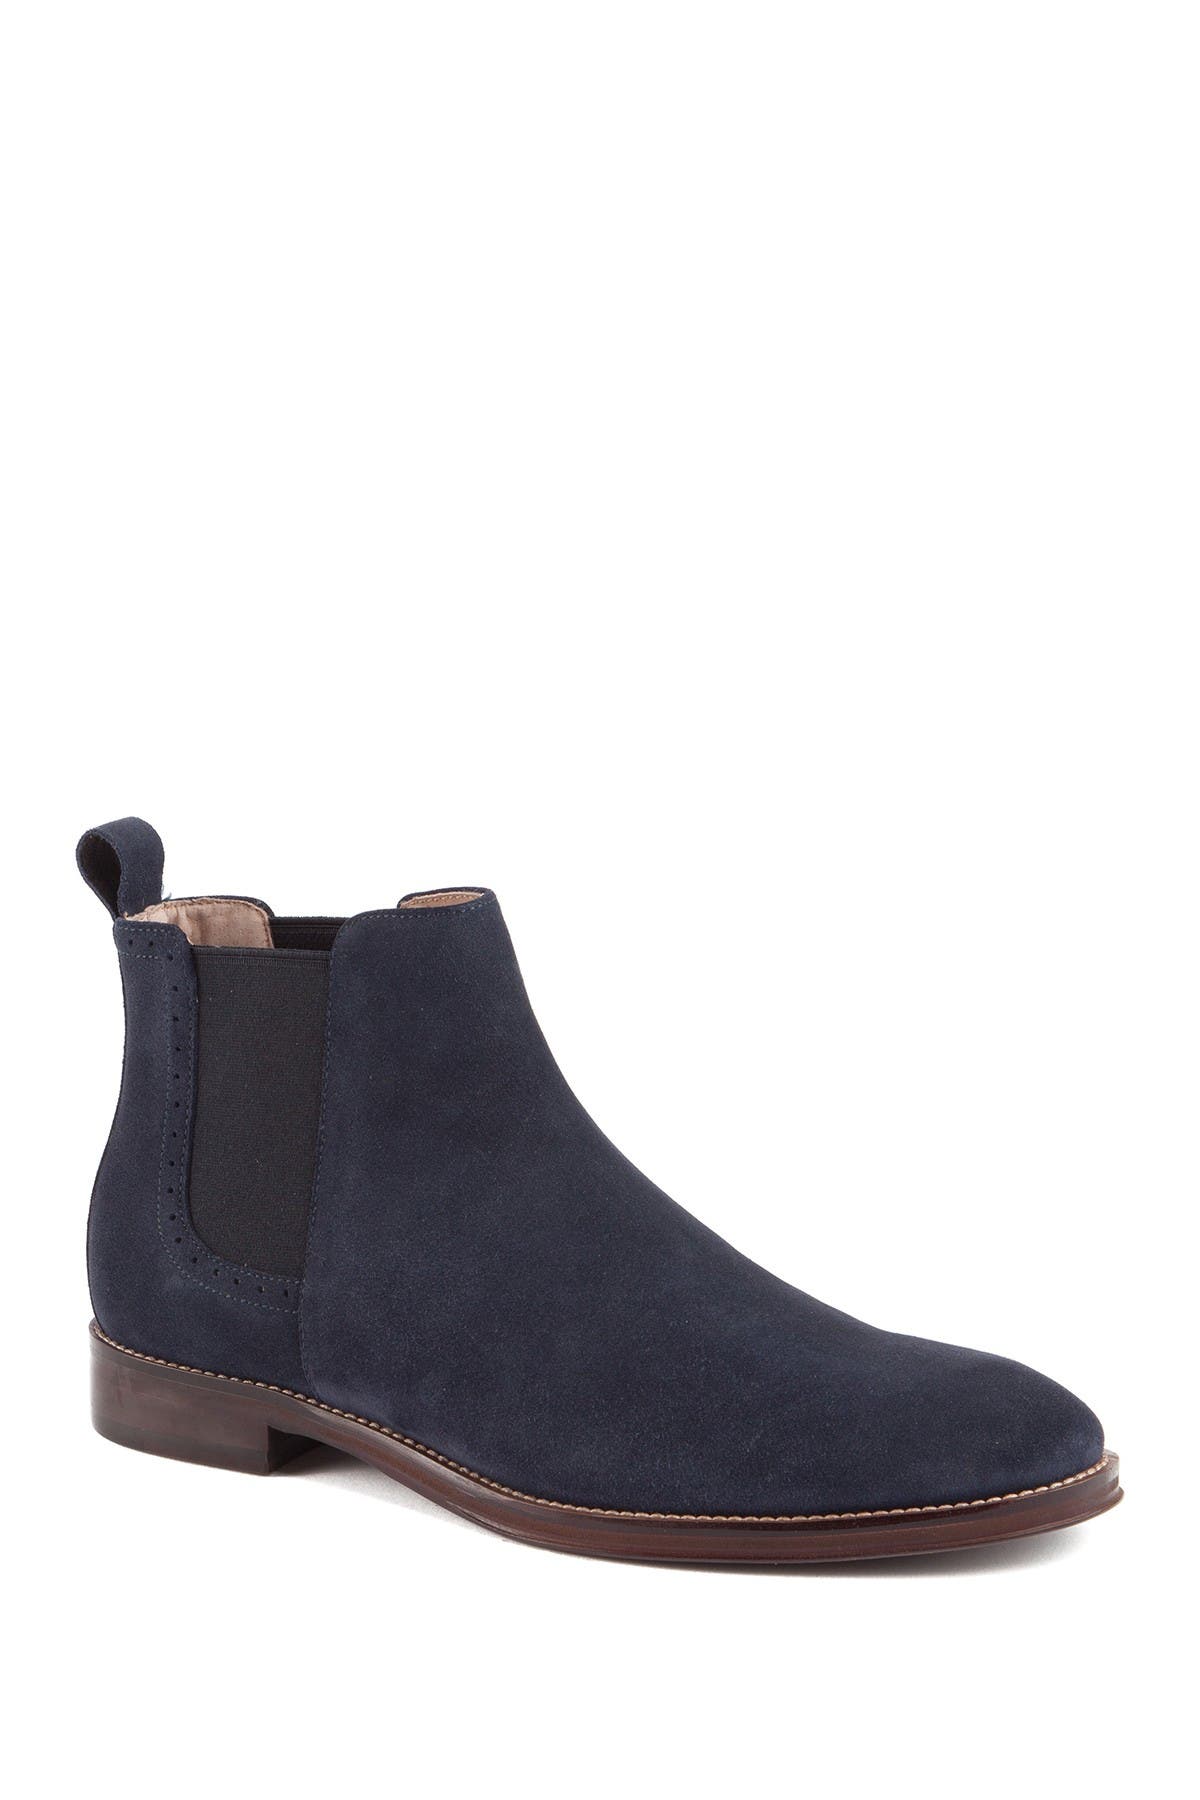 johnston and murphy suede chelsea boots